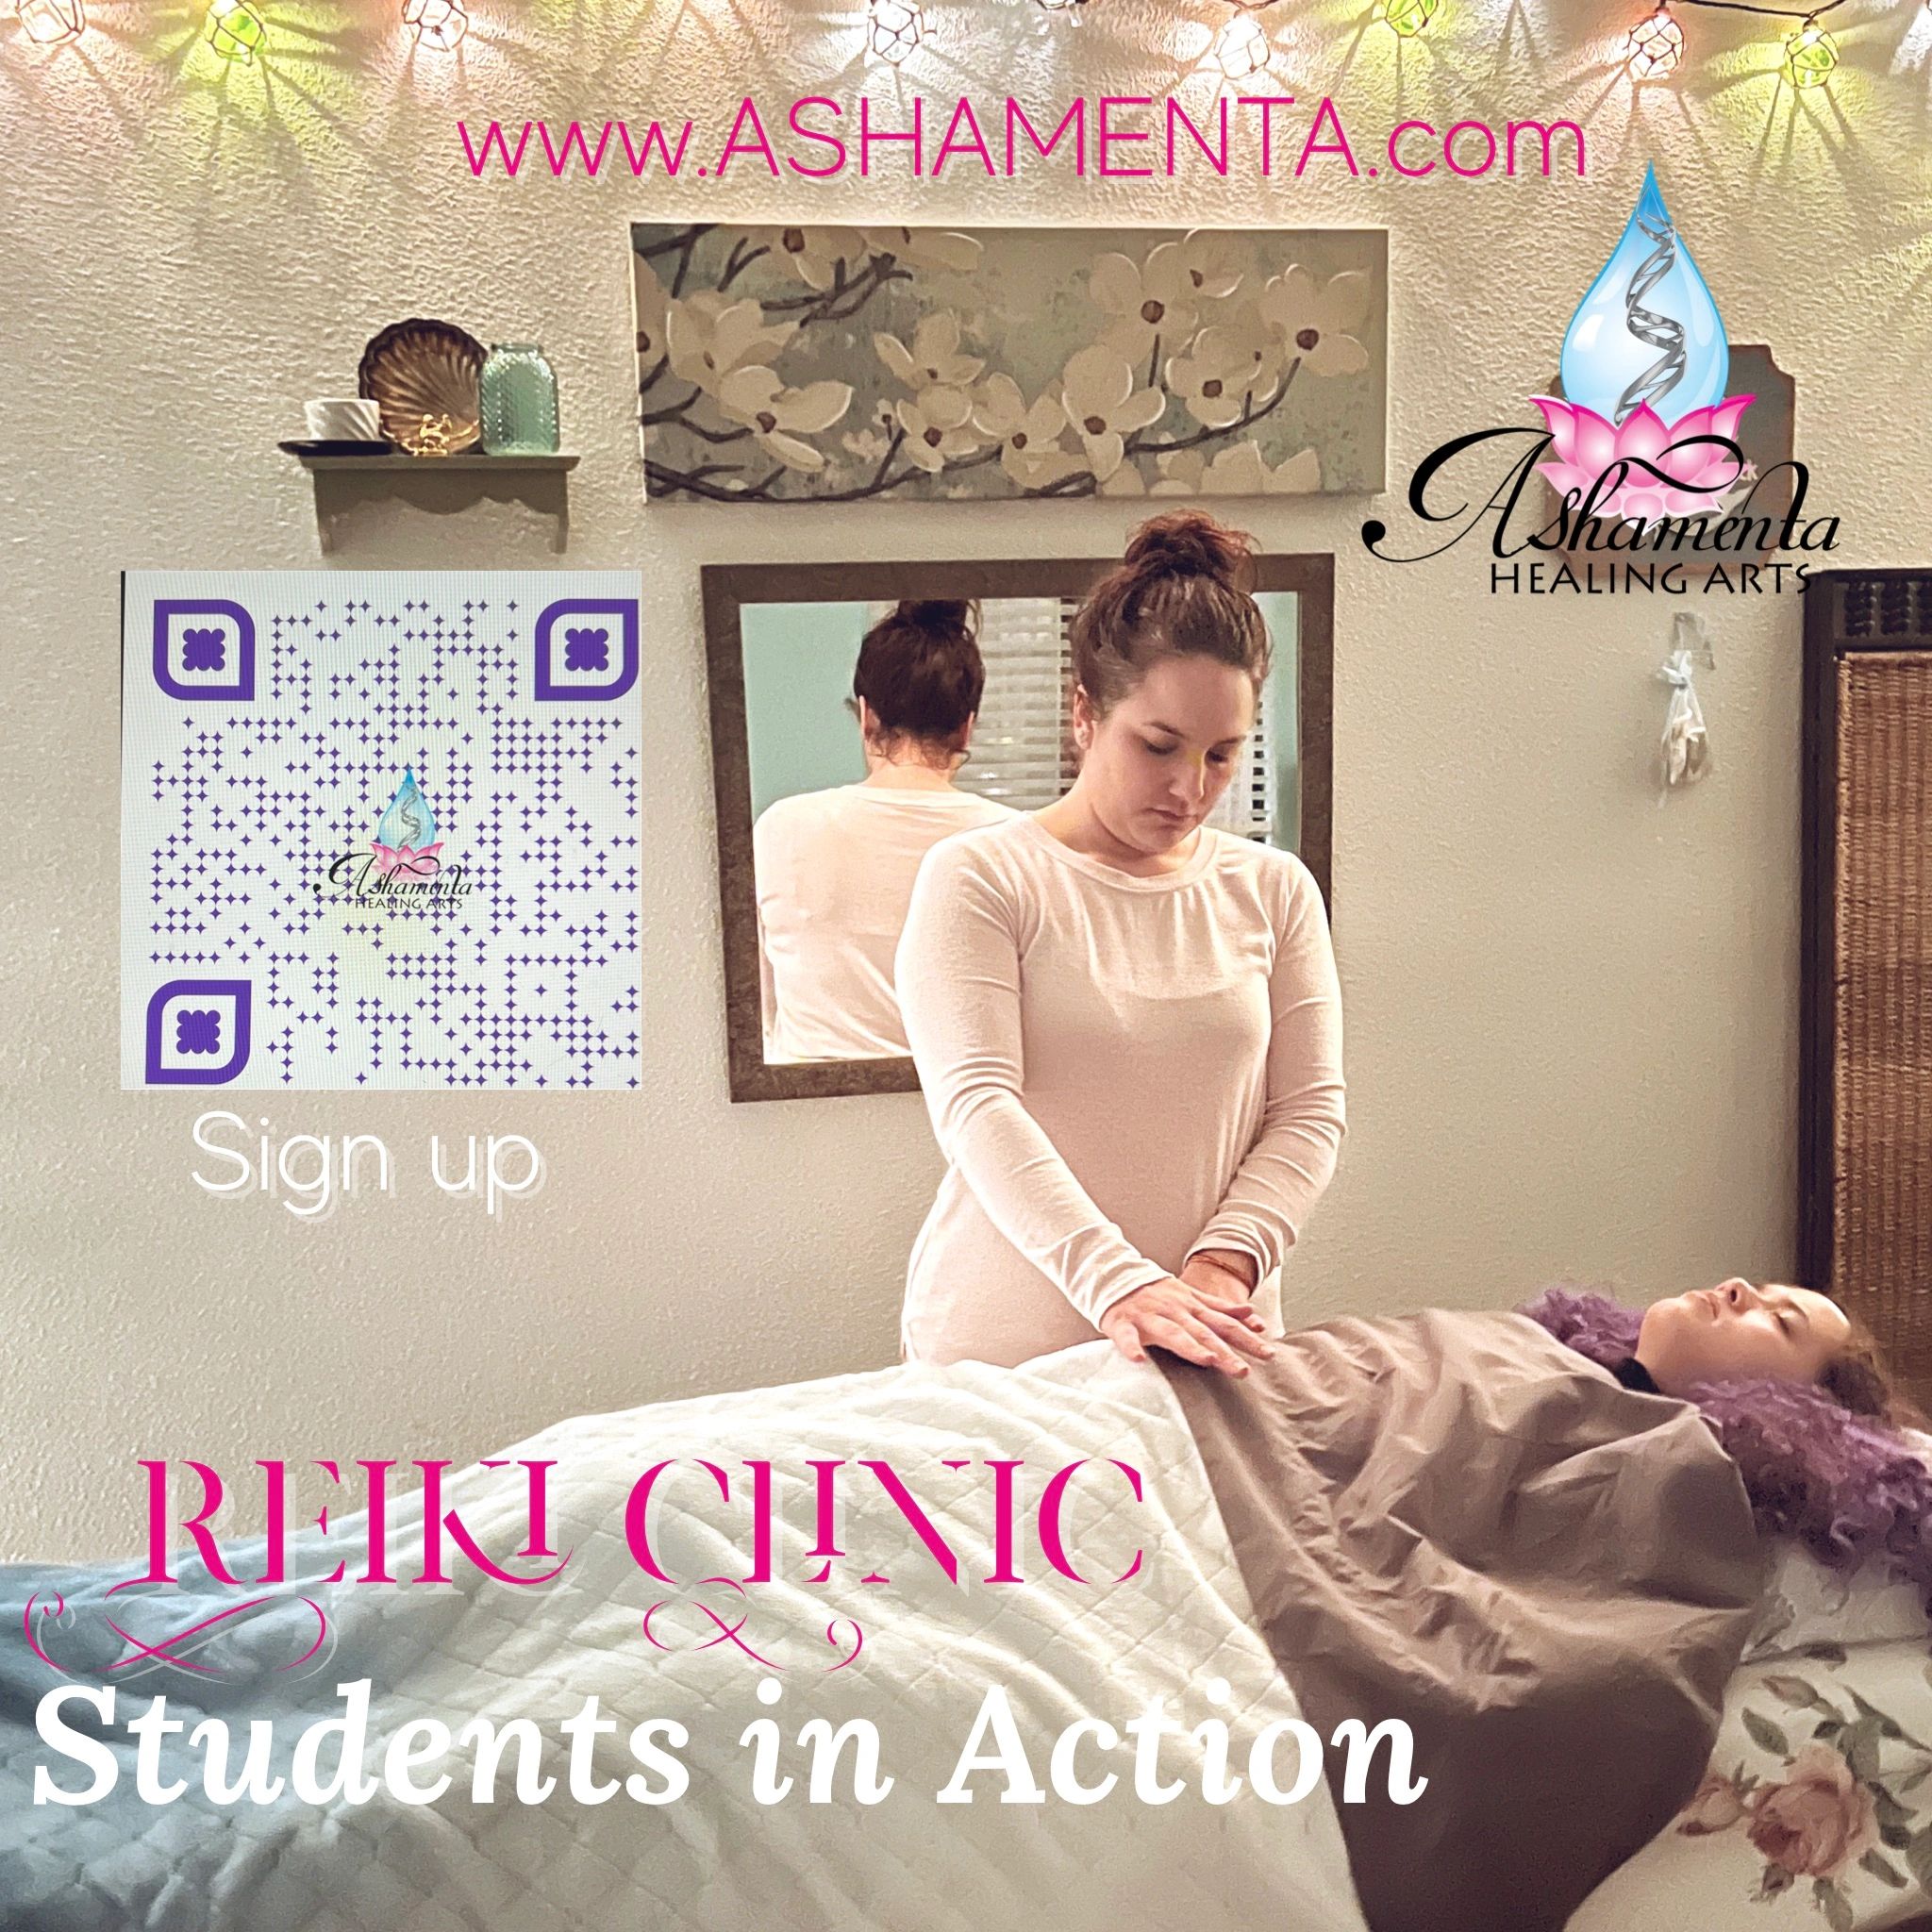 Reiki clinic at Ashamenta healing arts. Boise Idaho.  Our hands on training leads to success!